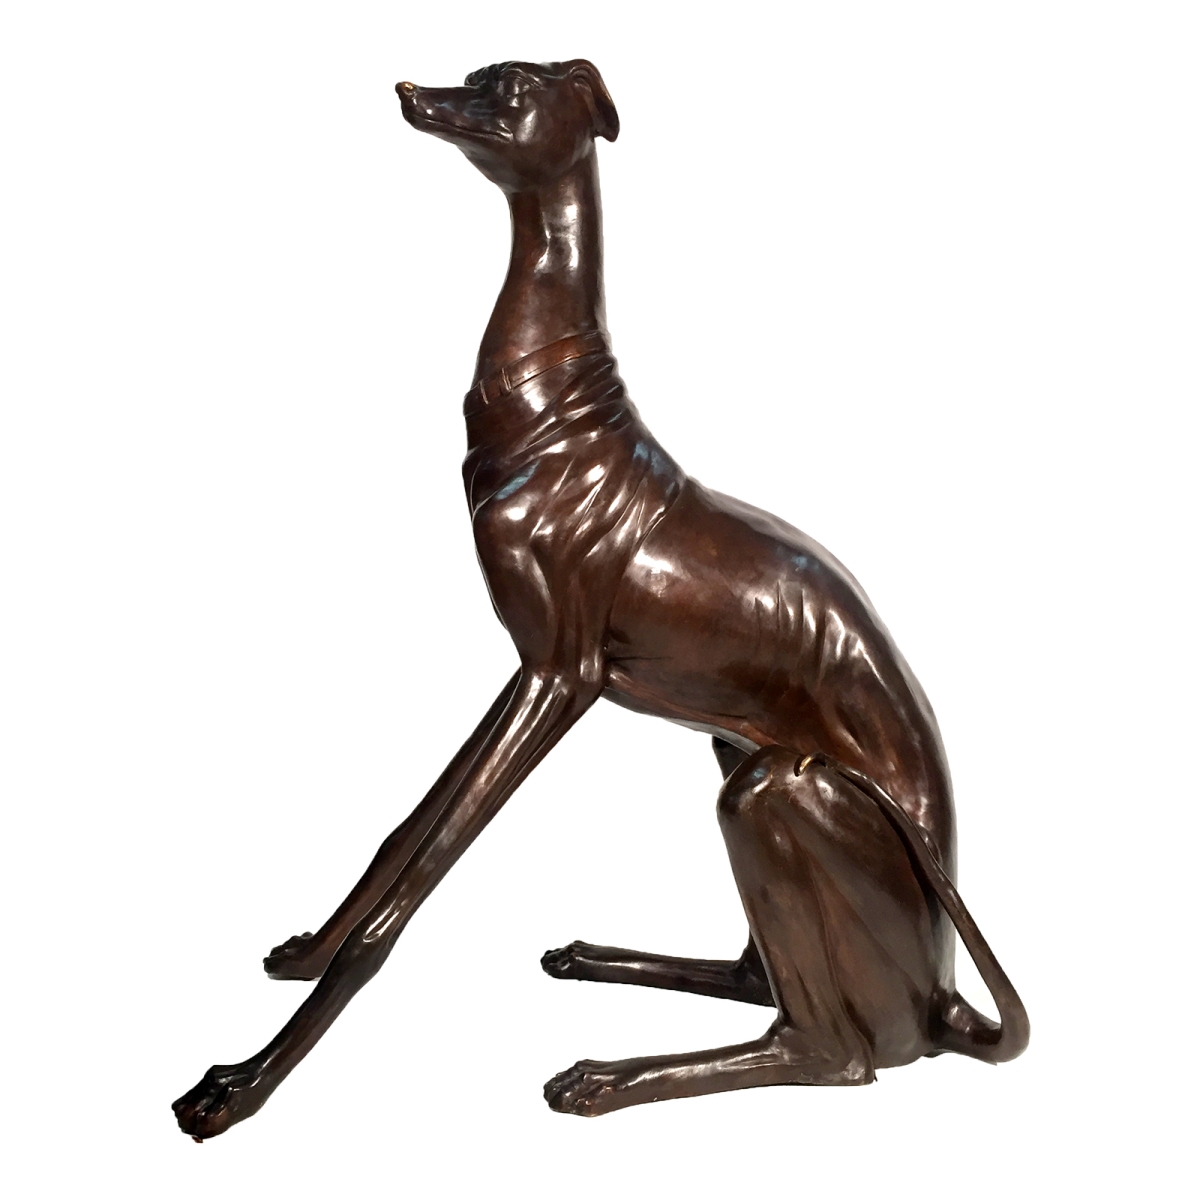 Srb074474 Bronze Large Sitting Whippet Dog Sculpture, 62 X 28 X 50 In.